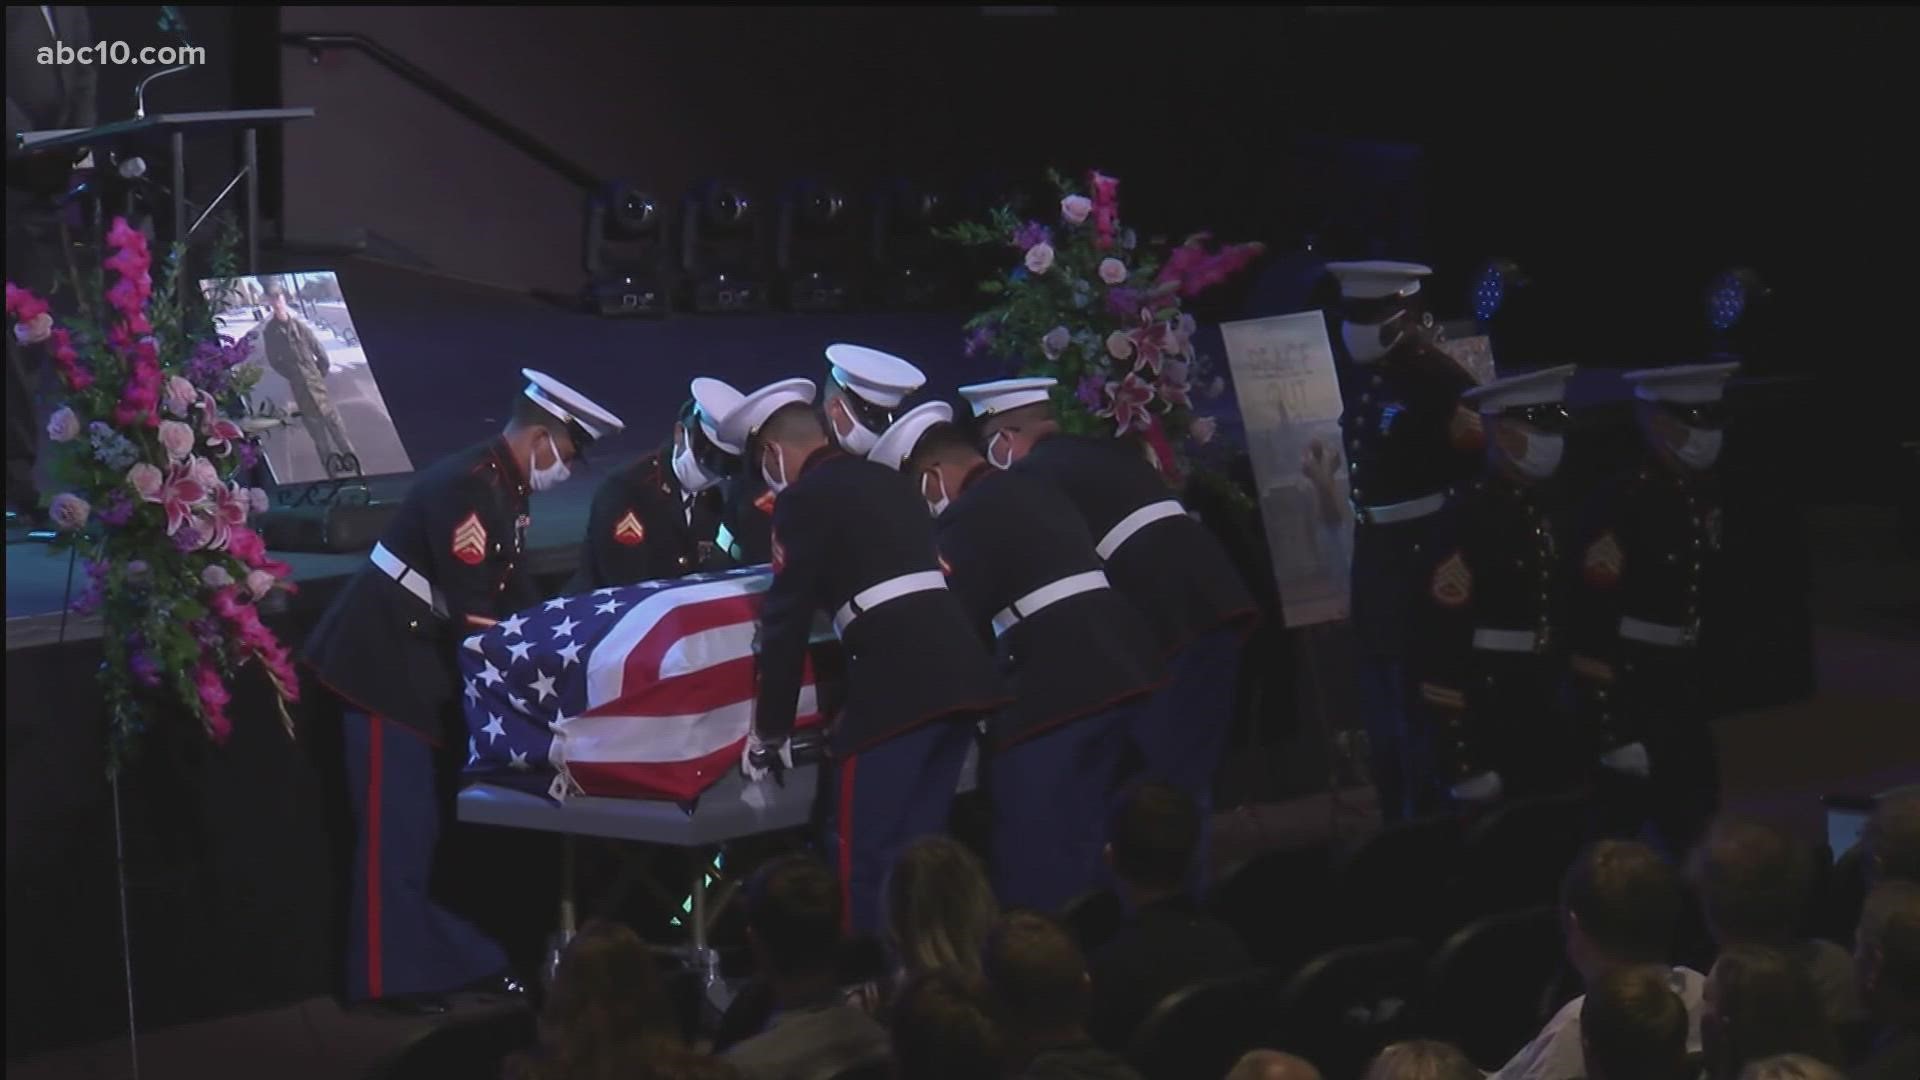 The Roseville native was killed in the Kabul Airport attack.  Saturday's memorial service paid tribute to her sacrifice.